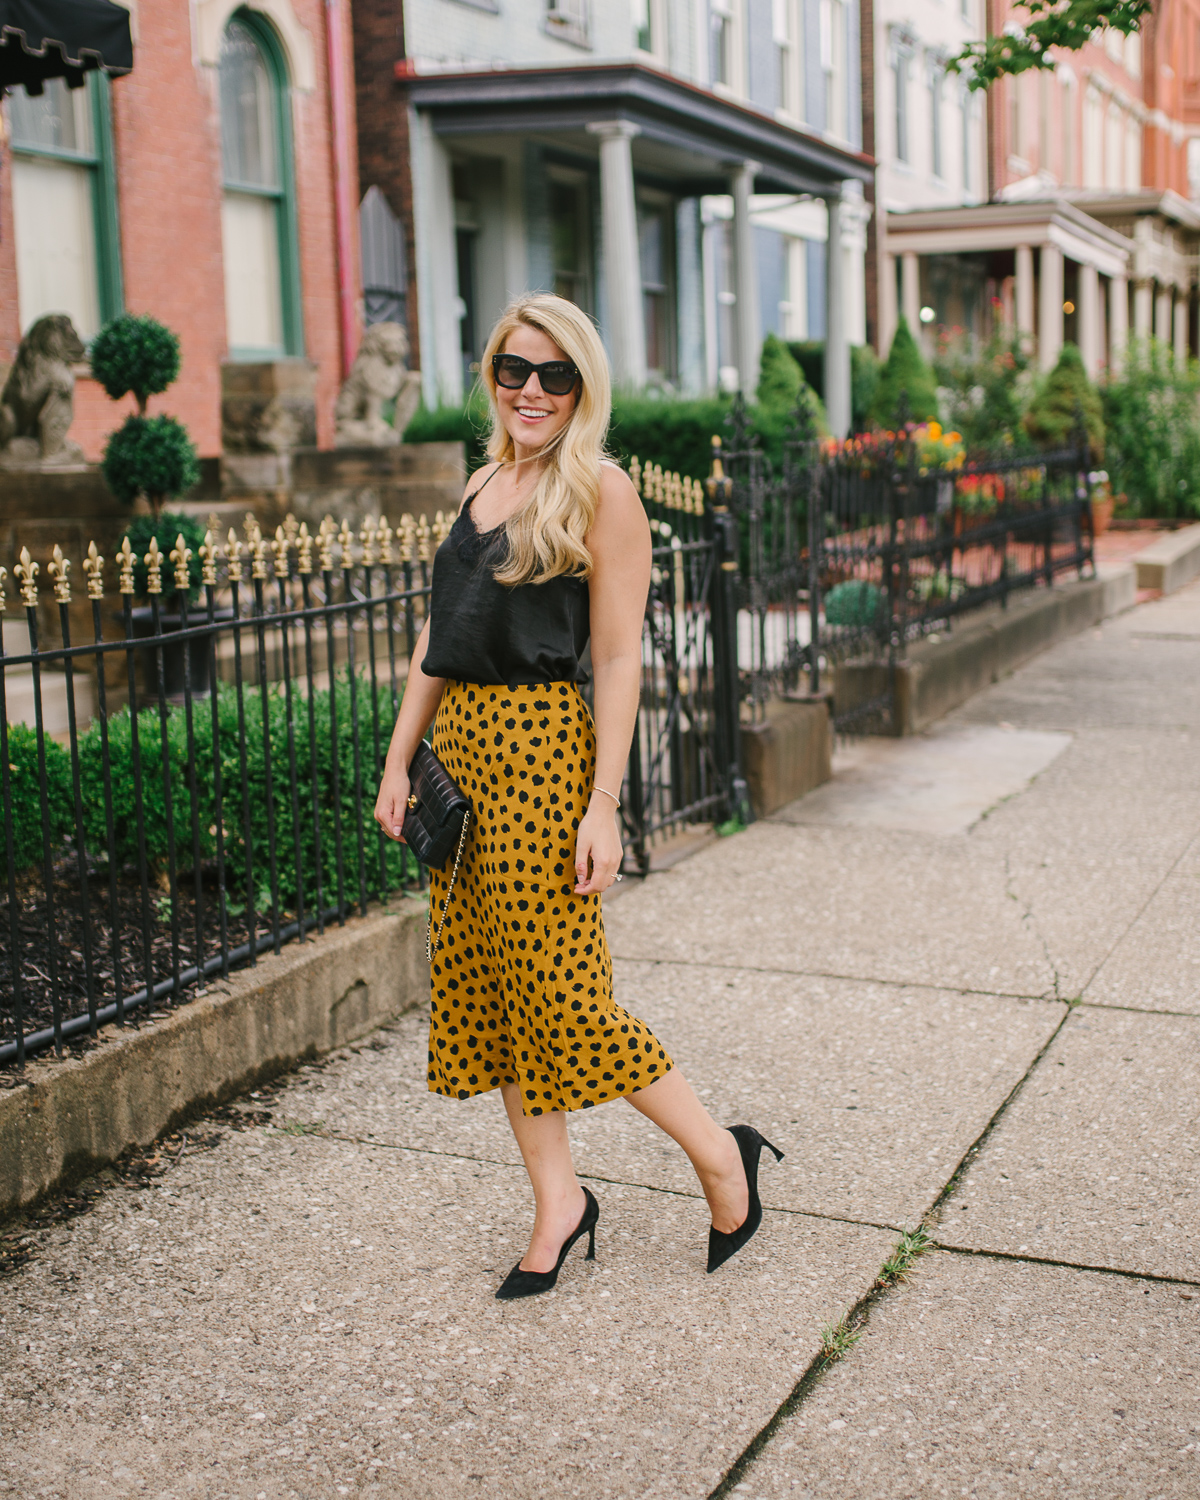 Summer Wind: How to Style a Slip Skirt